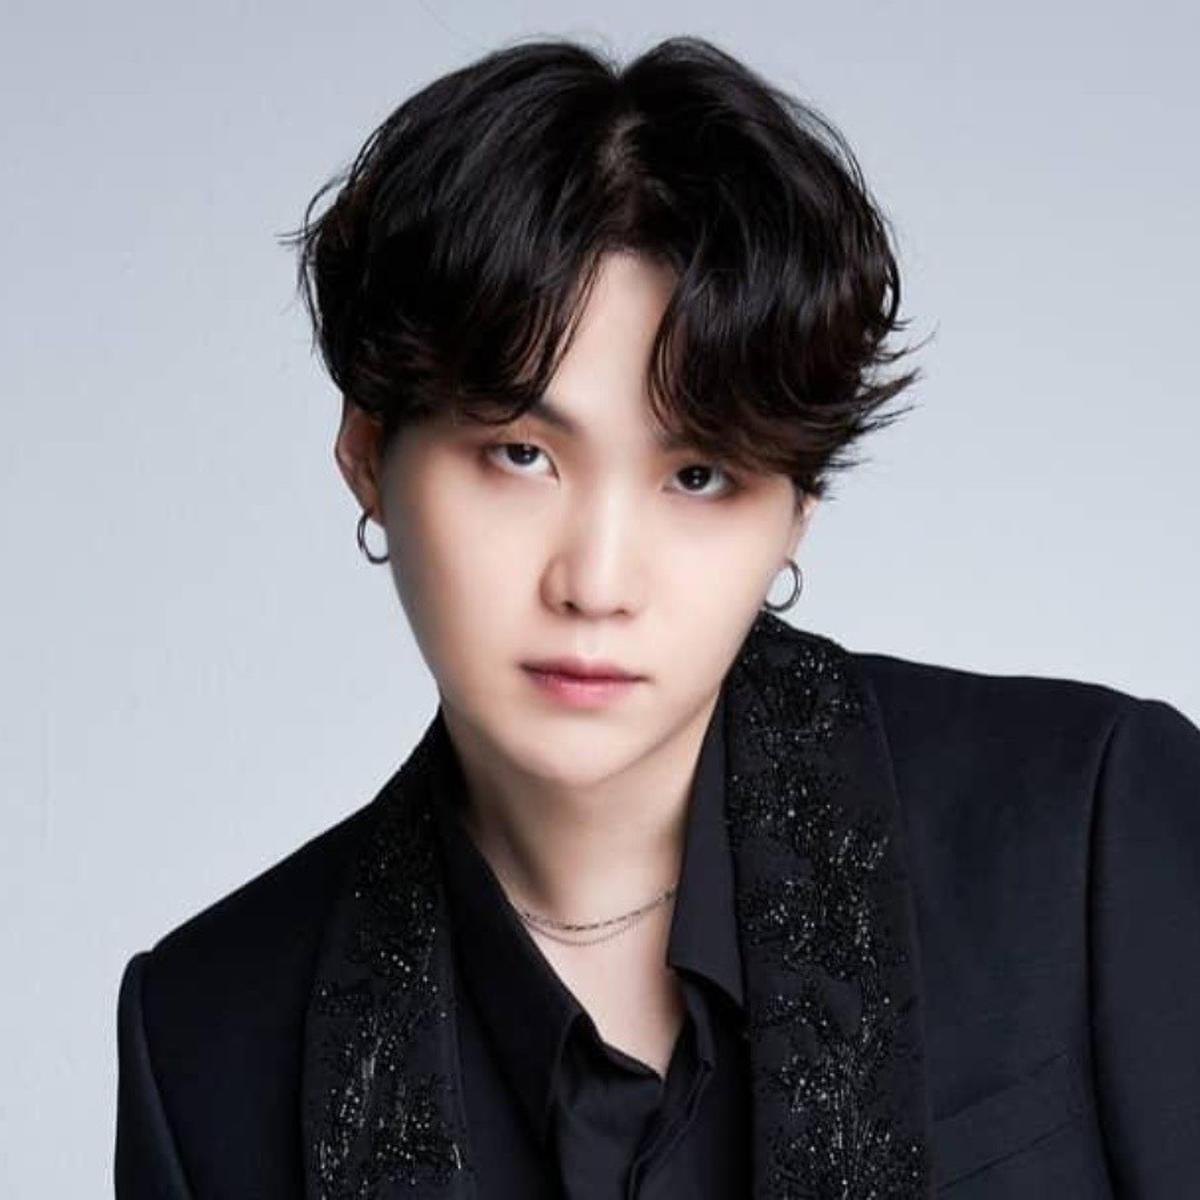 BTS' Suga reveals the songs that will be included in his album "DDAY"